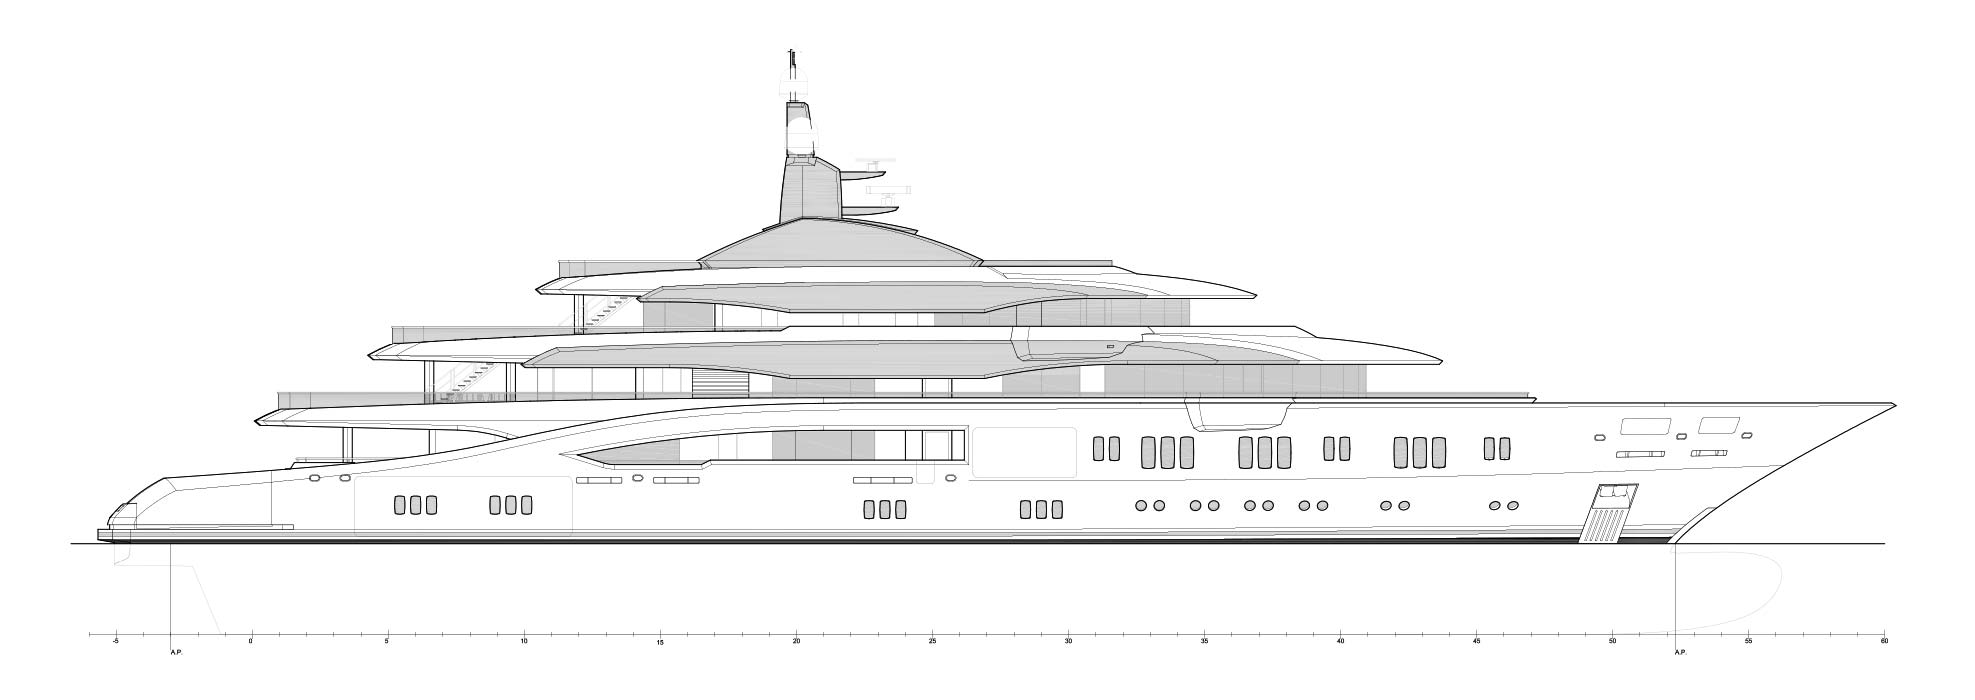 New 80m Yacht for Sale | Build a 80m Yacht | Dunya Yachts